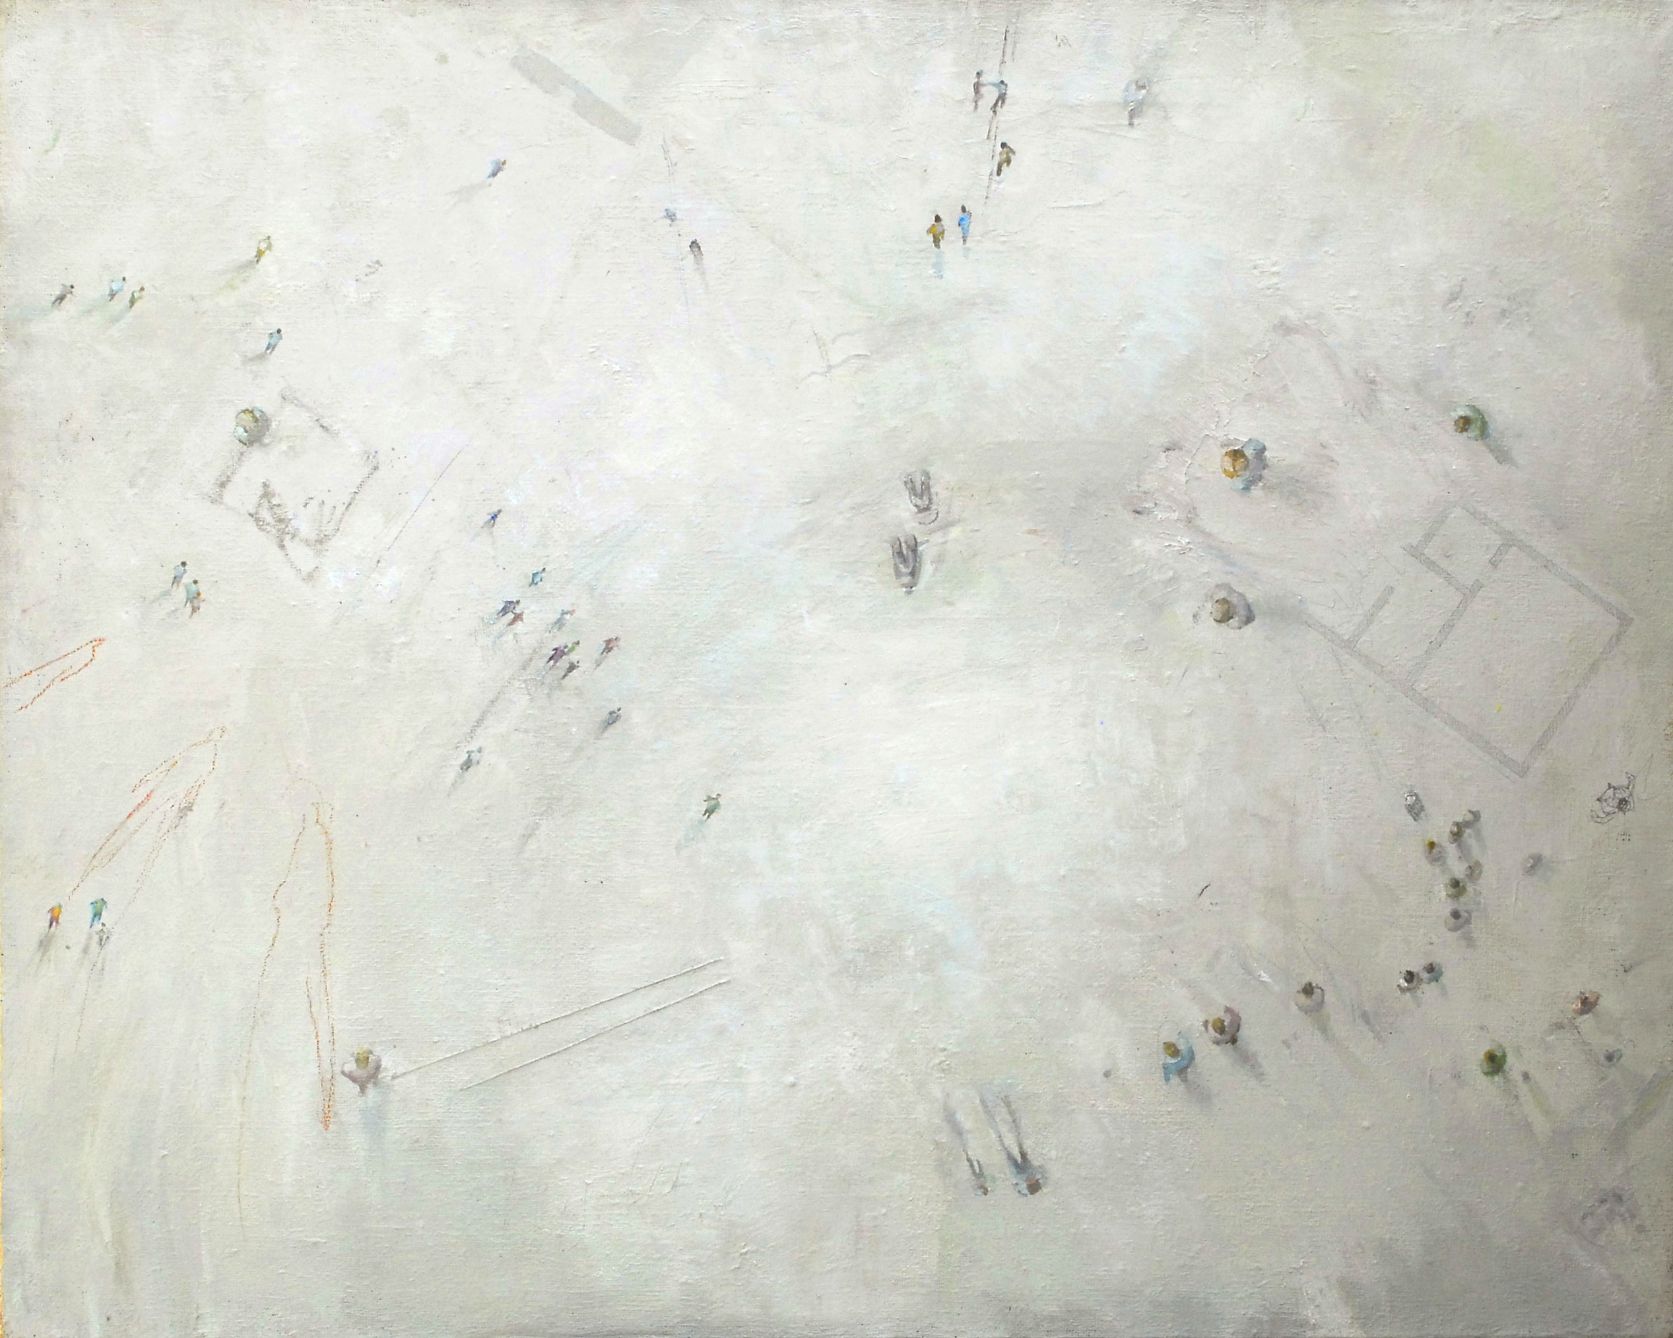 Over/view IV, 2008, oil on jute, 120 x 150 cm